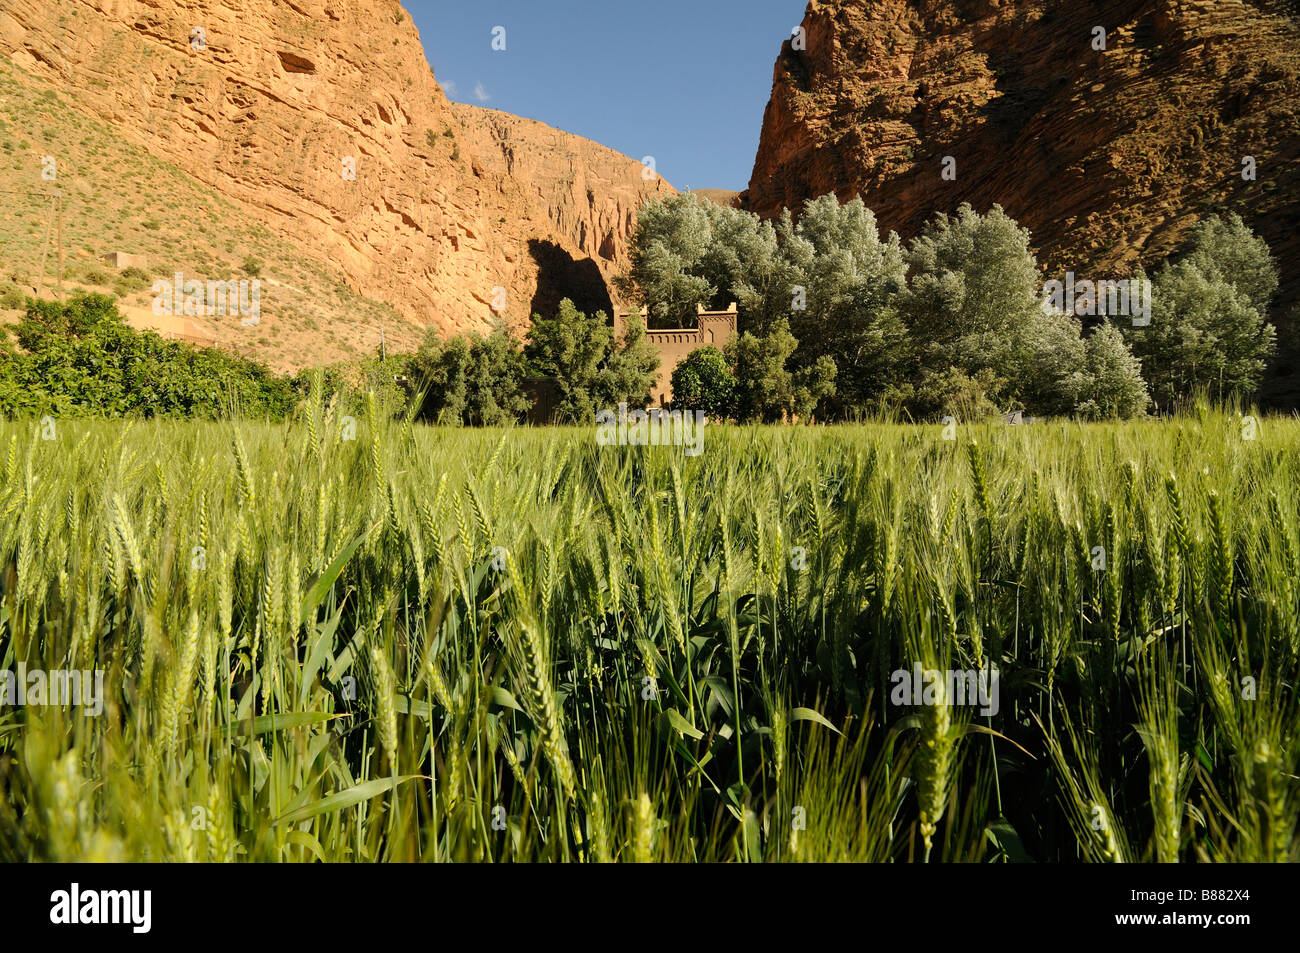 A fortness or building and a wheat field in the Dades gorge in Morocco Africa Stock Photo